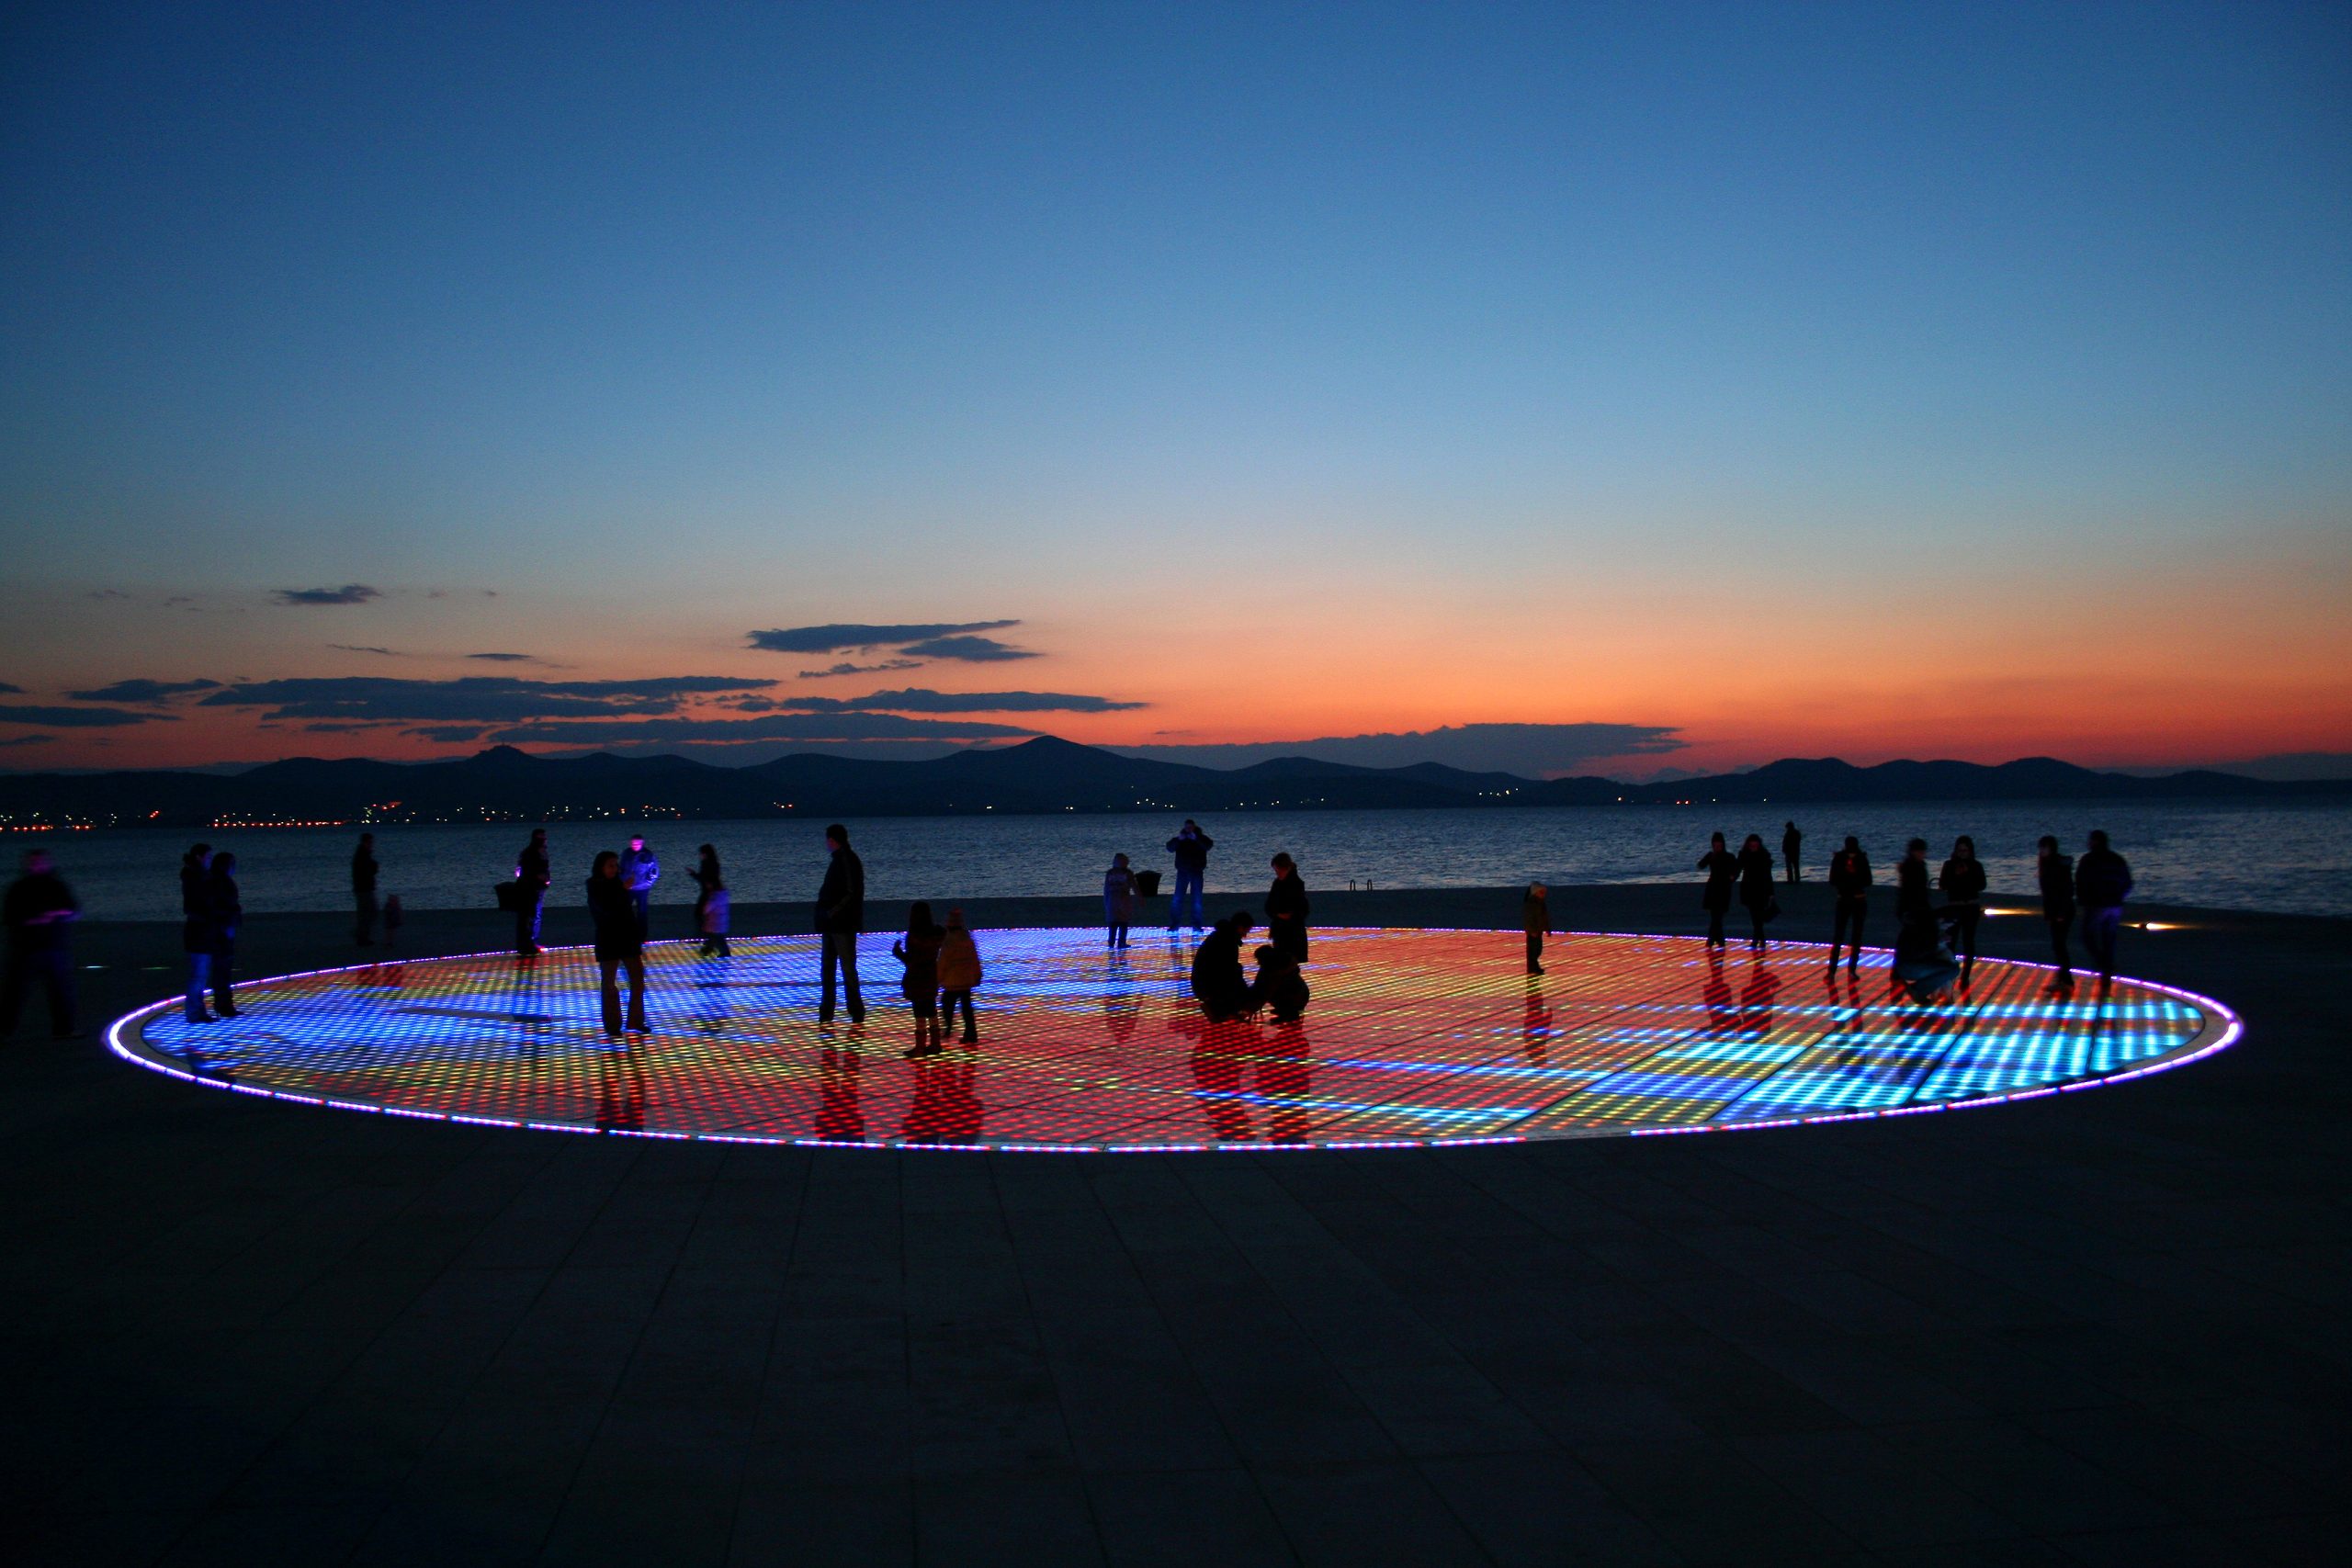 The Greetings to the sun installation in Zadar